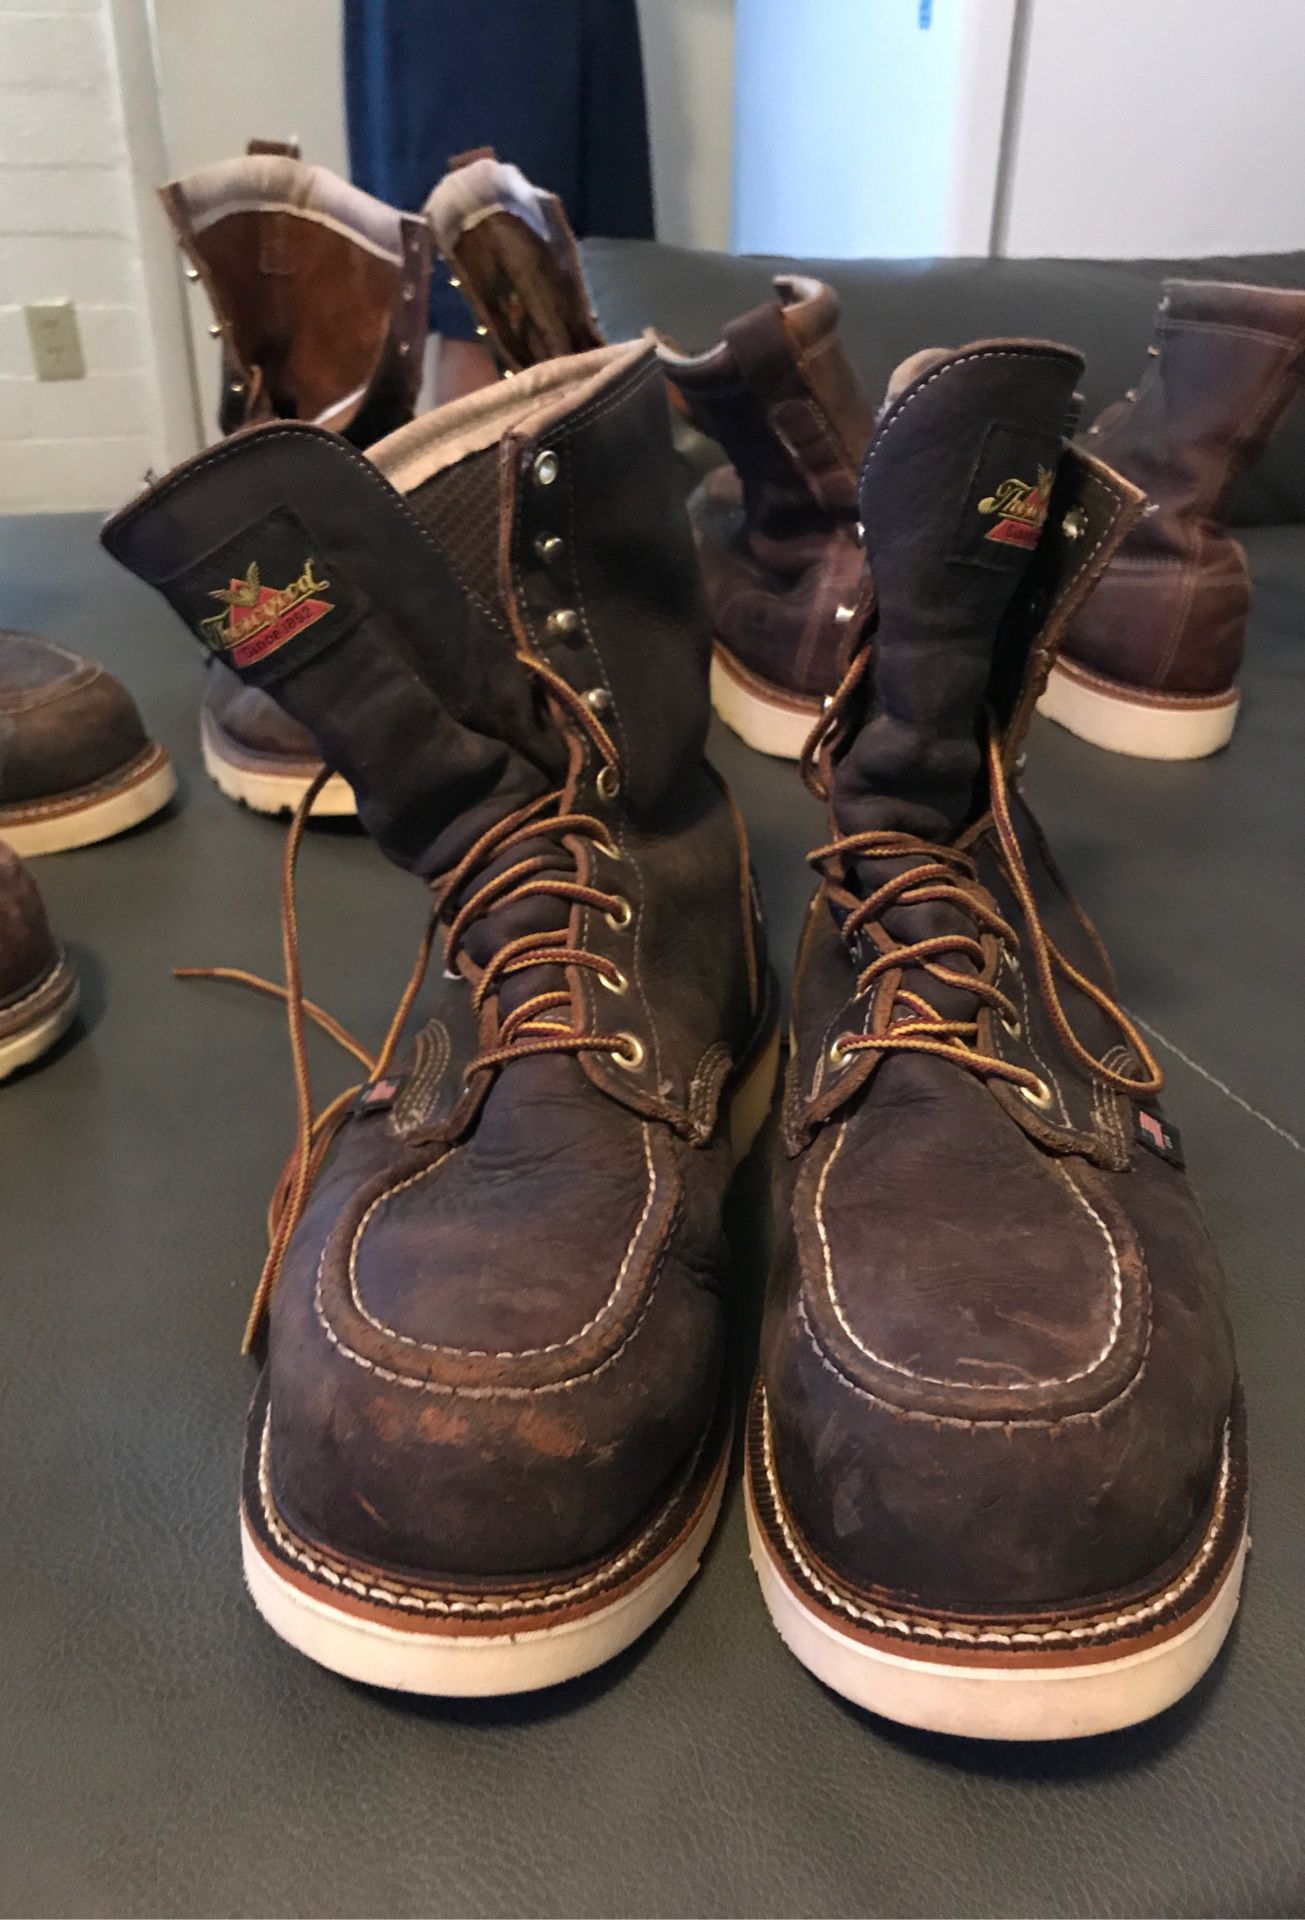 Work Boots|Thoroboots|size10